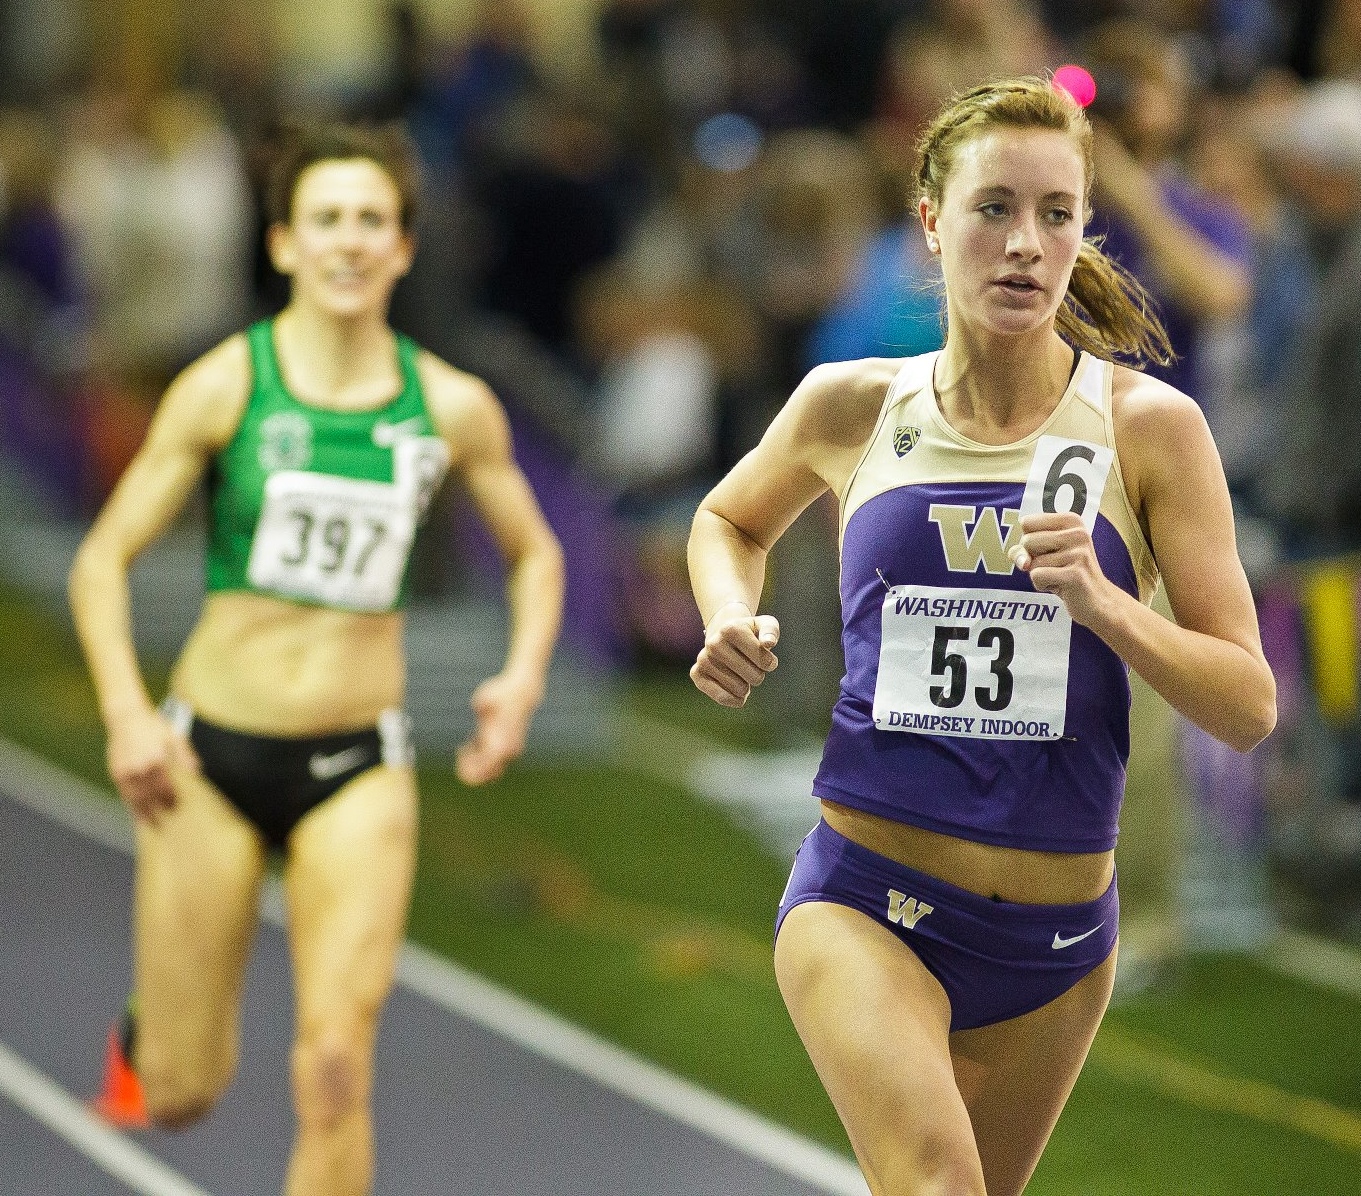 Katie Flood fourth on all time collegiate mile list; Bernard Lagat does it again! pic